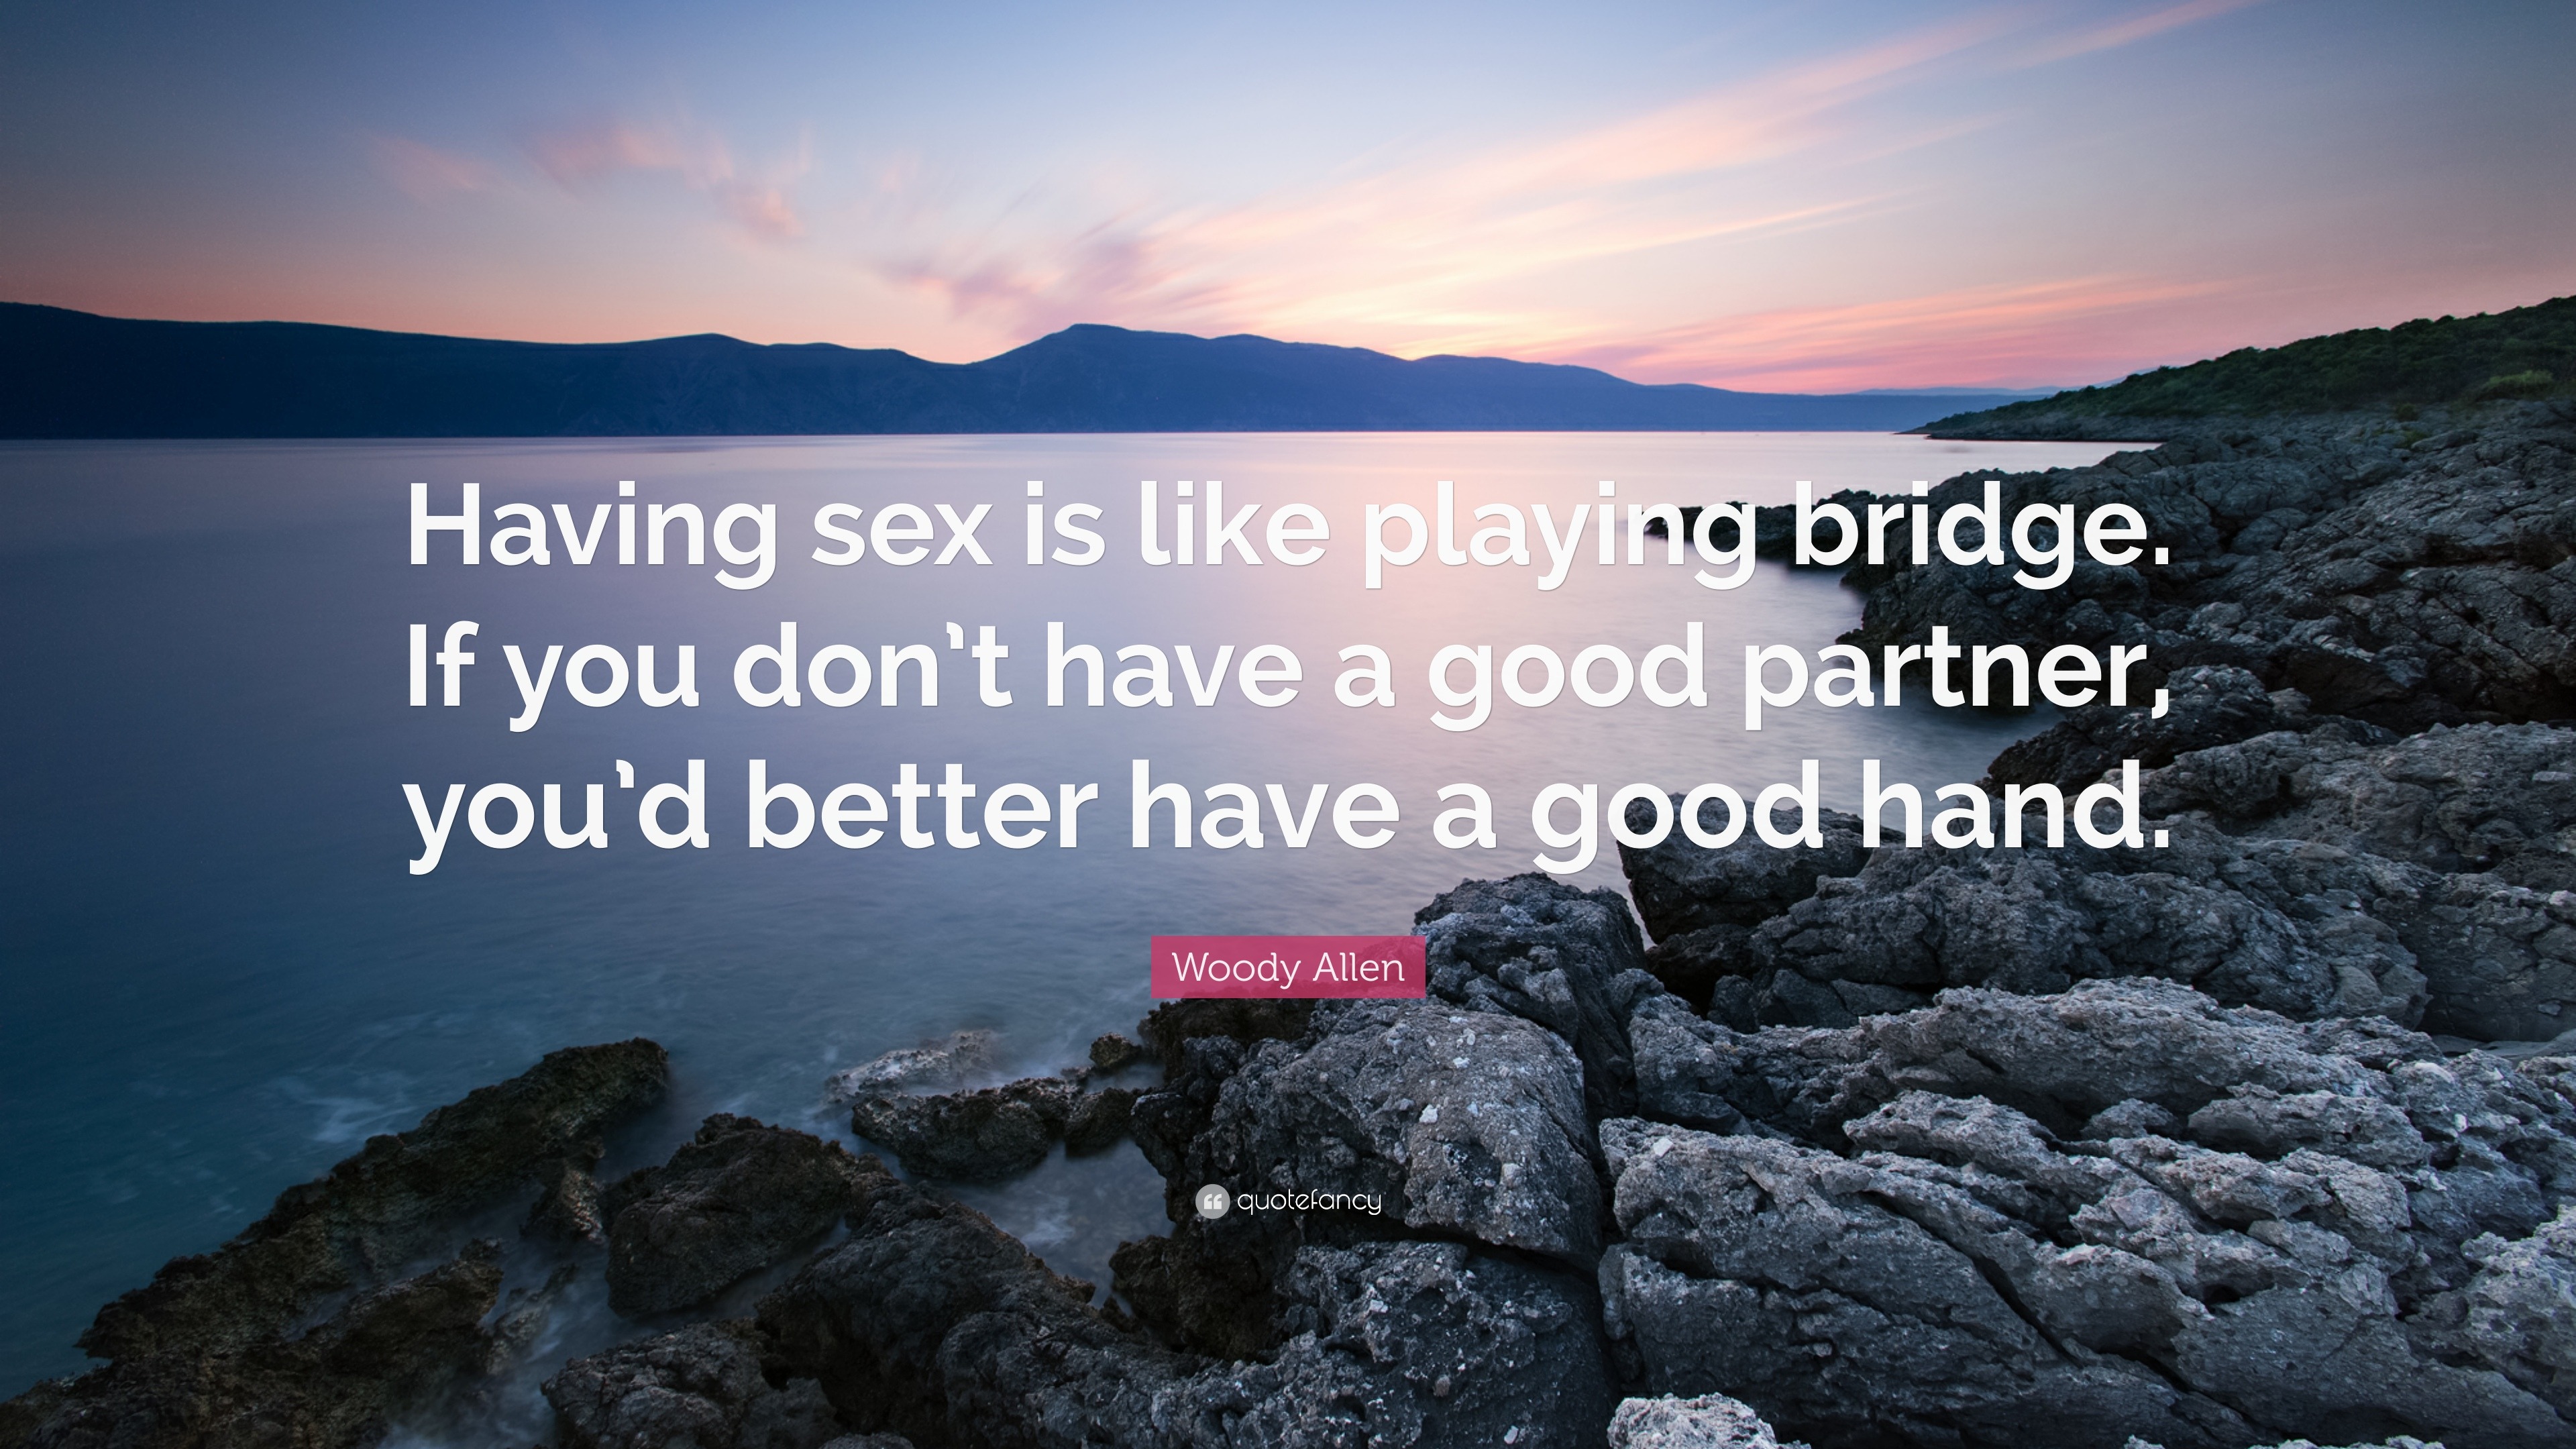 Woody Allen Quote “Having is like playing bridge If you don